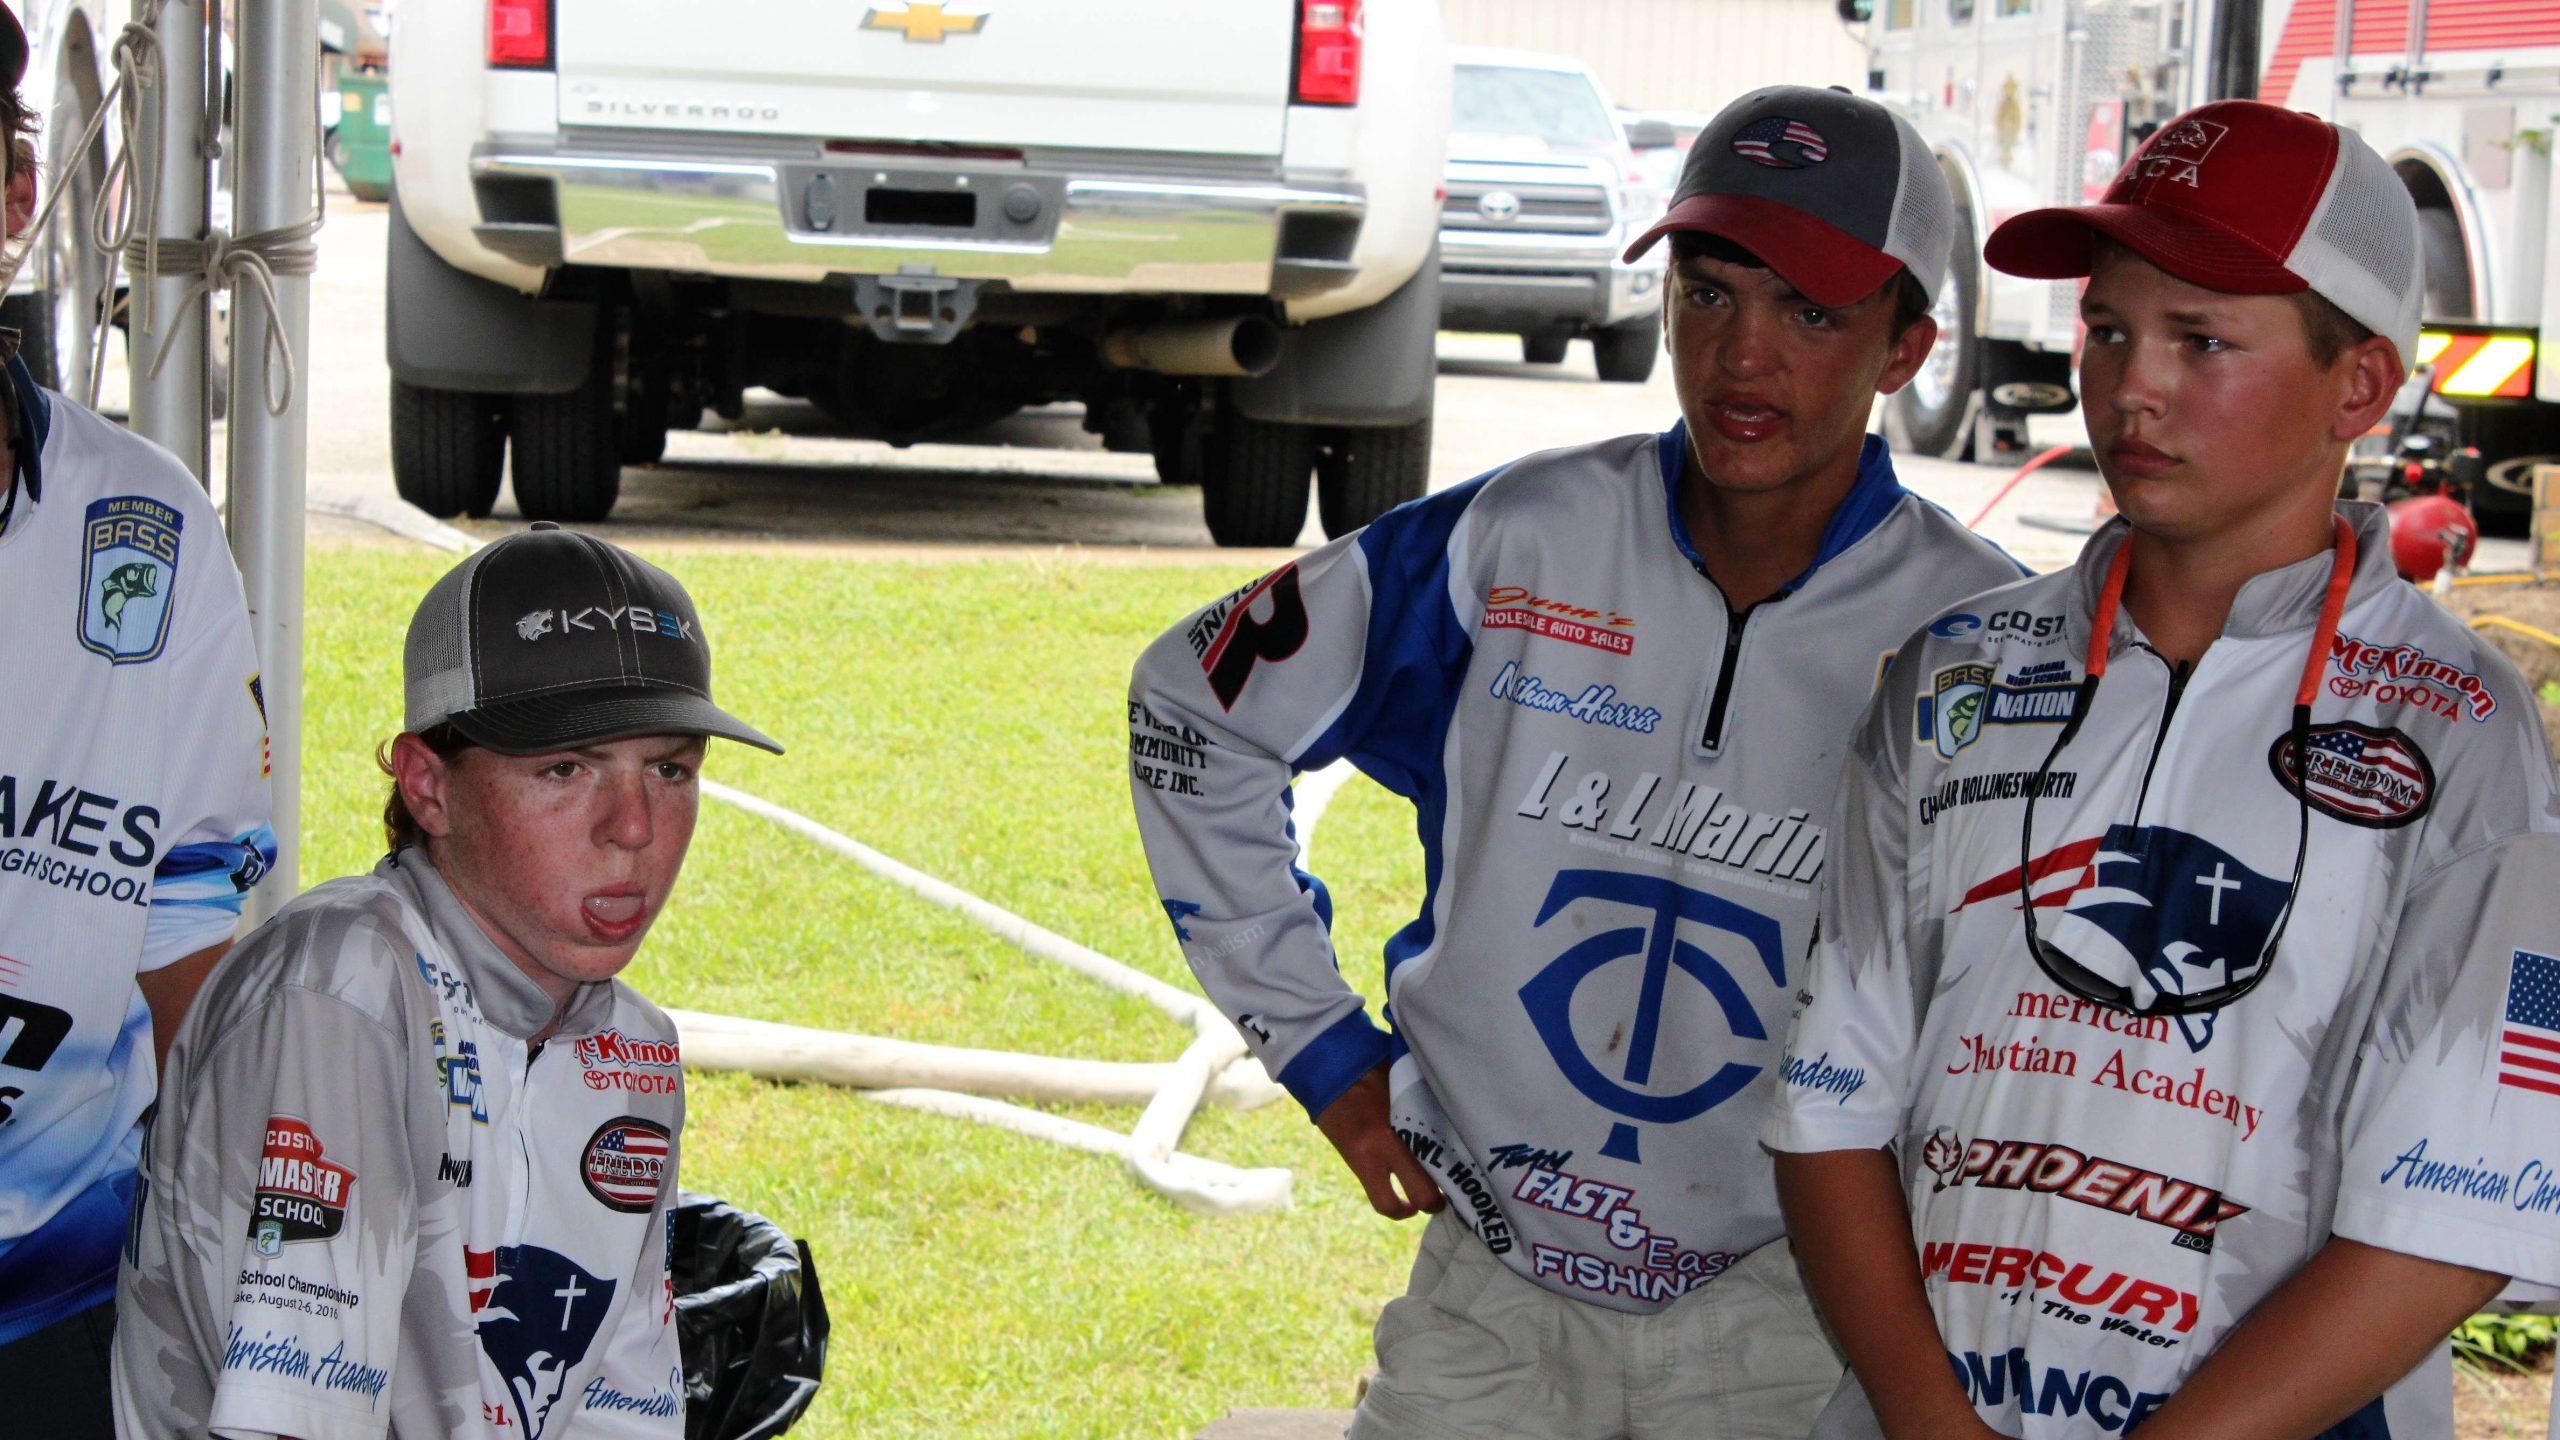 Miller Dowling, left, and Chandlar Hollingsworth, right, knew they had a heavy limit of fish on Day 2 of the Costa Bassmaster Junior Championship presented by DICKâS Sporting Goods. But waiting backstage, or in the hot seat as they would learn, can be a tedious task. The anglers from American Christian Academy in Tuscaloosa, Alabama waited patiently before the weigh-in to see how they would fare. Pictured, center, is Nathan Harris of the Tuscaloosa County Bassmasters Club.